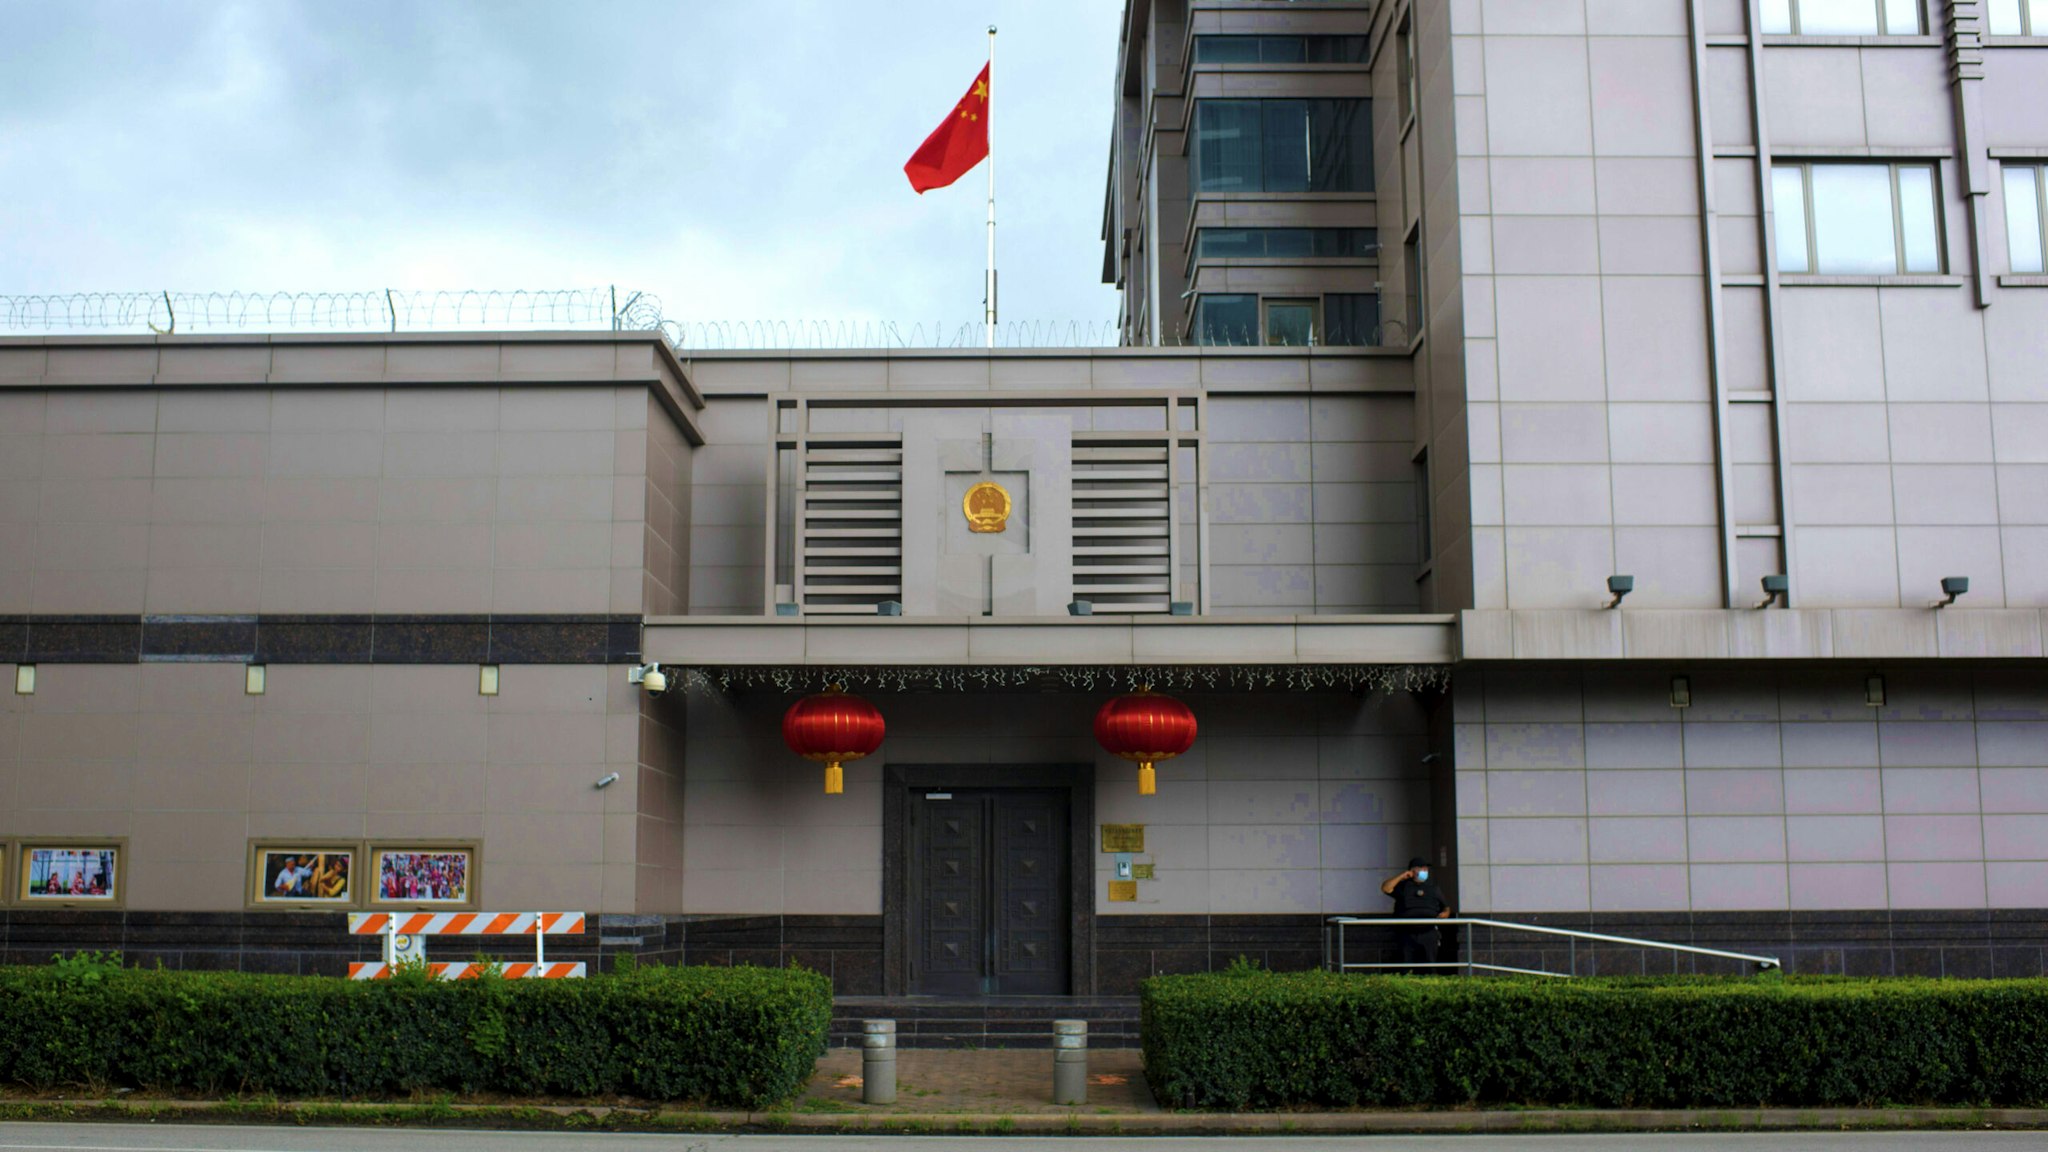 The Chinese flag flies outside of the Chinese consulate in Houston after the US State Department ordered China to close the consulate in Houston, Texas, July 22, 2020. - US-Chinese tensions, already rising because of the coronavirus pandemic and crackdown in Hong Kong, ratcheted up another notch on Wednesday as the US ordered the closure of the Chinese consulate in Houston within 72 hours. China reacted angrily to the US move, which came a day after the unveiling of a US indictment of two Chinese nationals for allegedly hacking hundreds of companies worldwide.